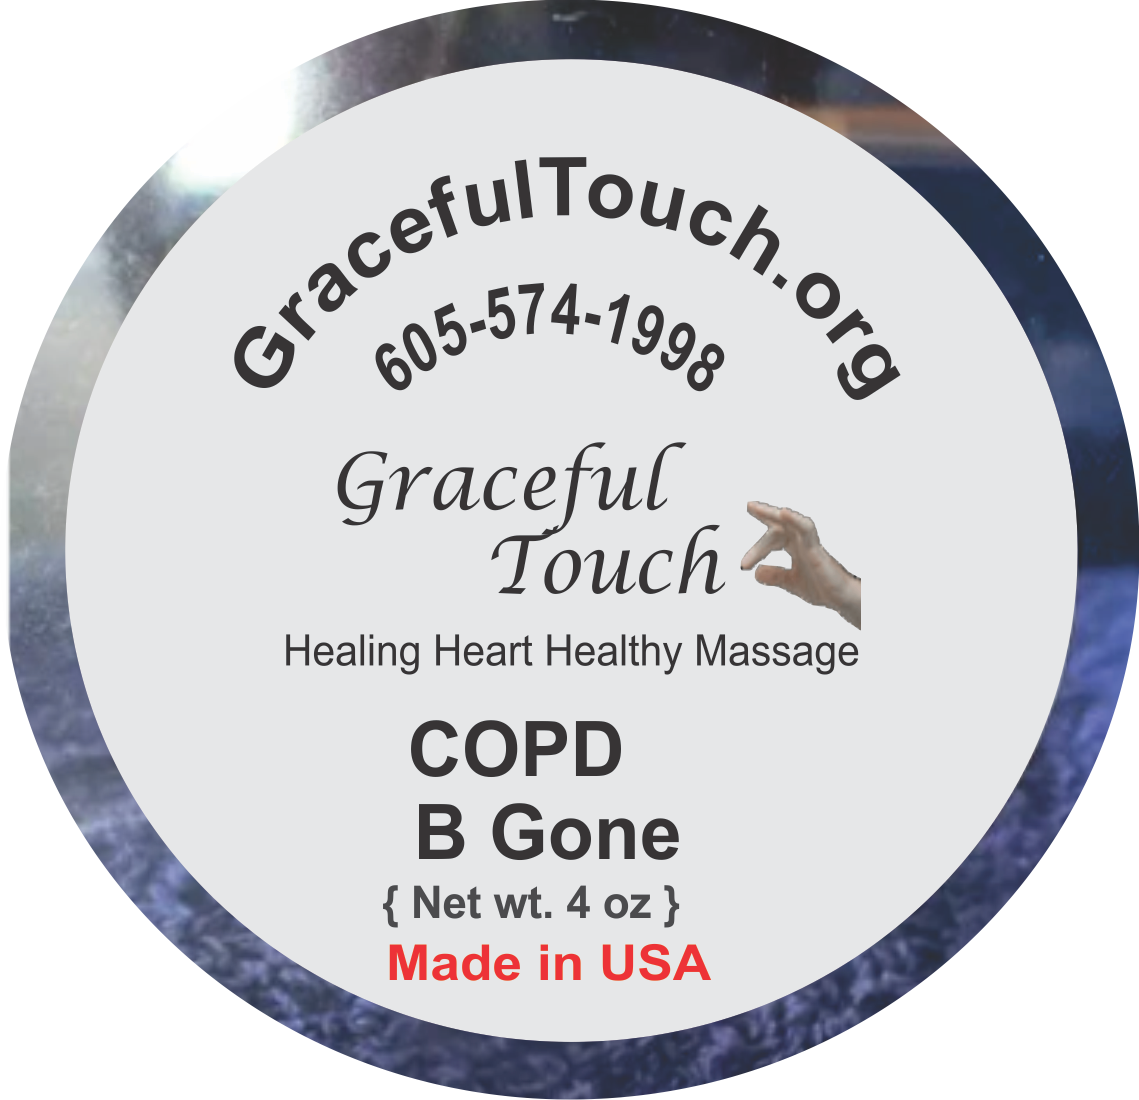 Effective Cream for COPD / Breathing Problems (Copd B Gone)